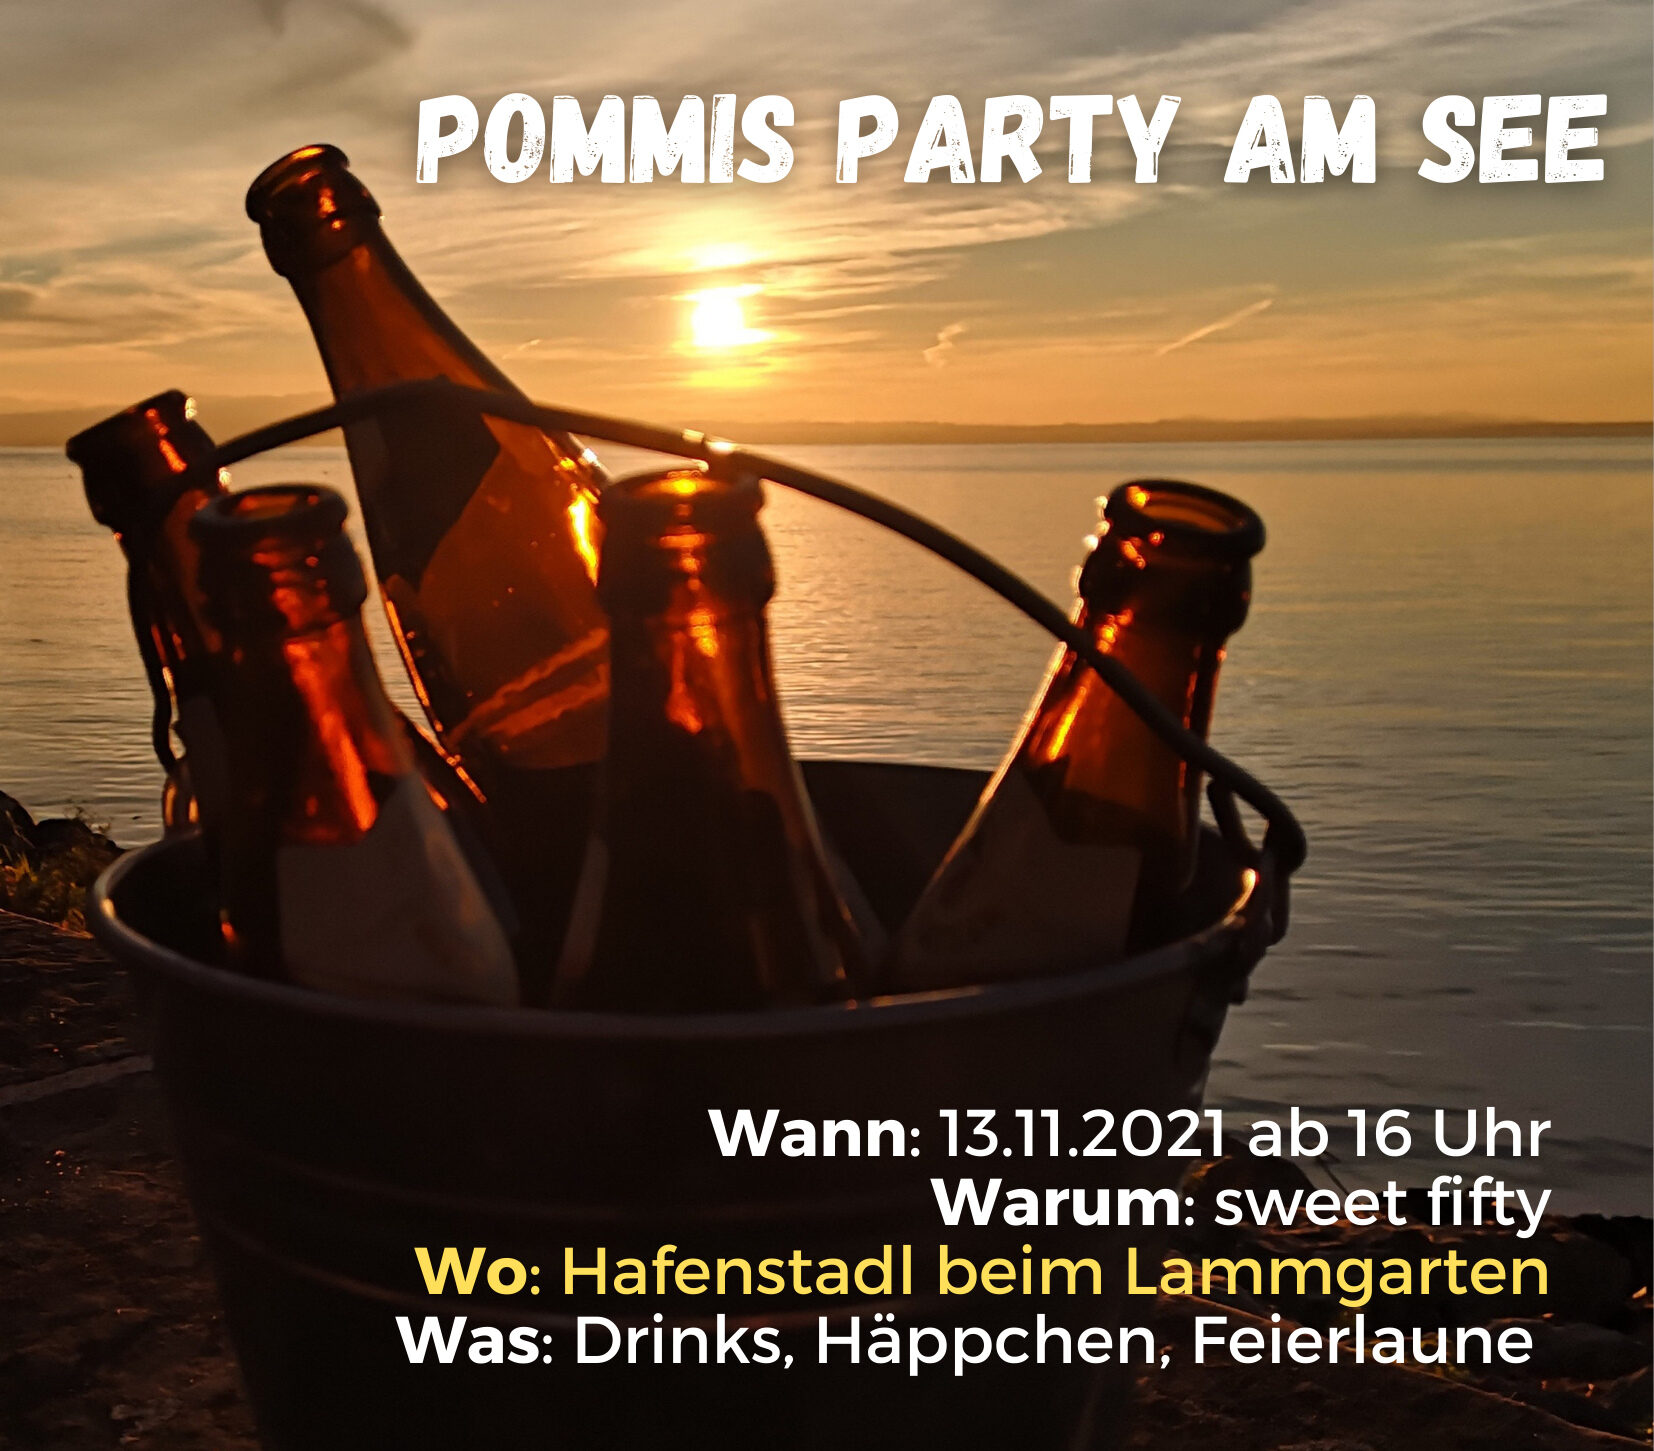 Pommis Party am See